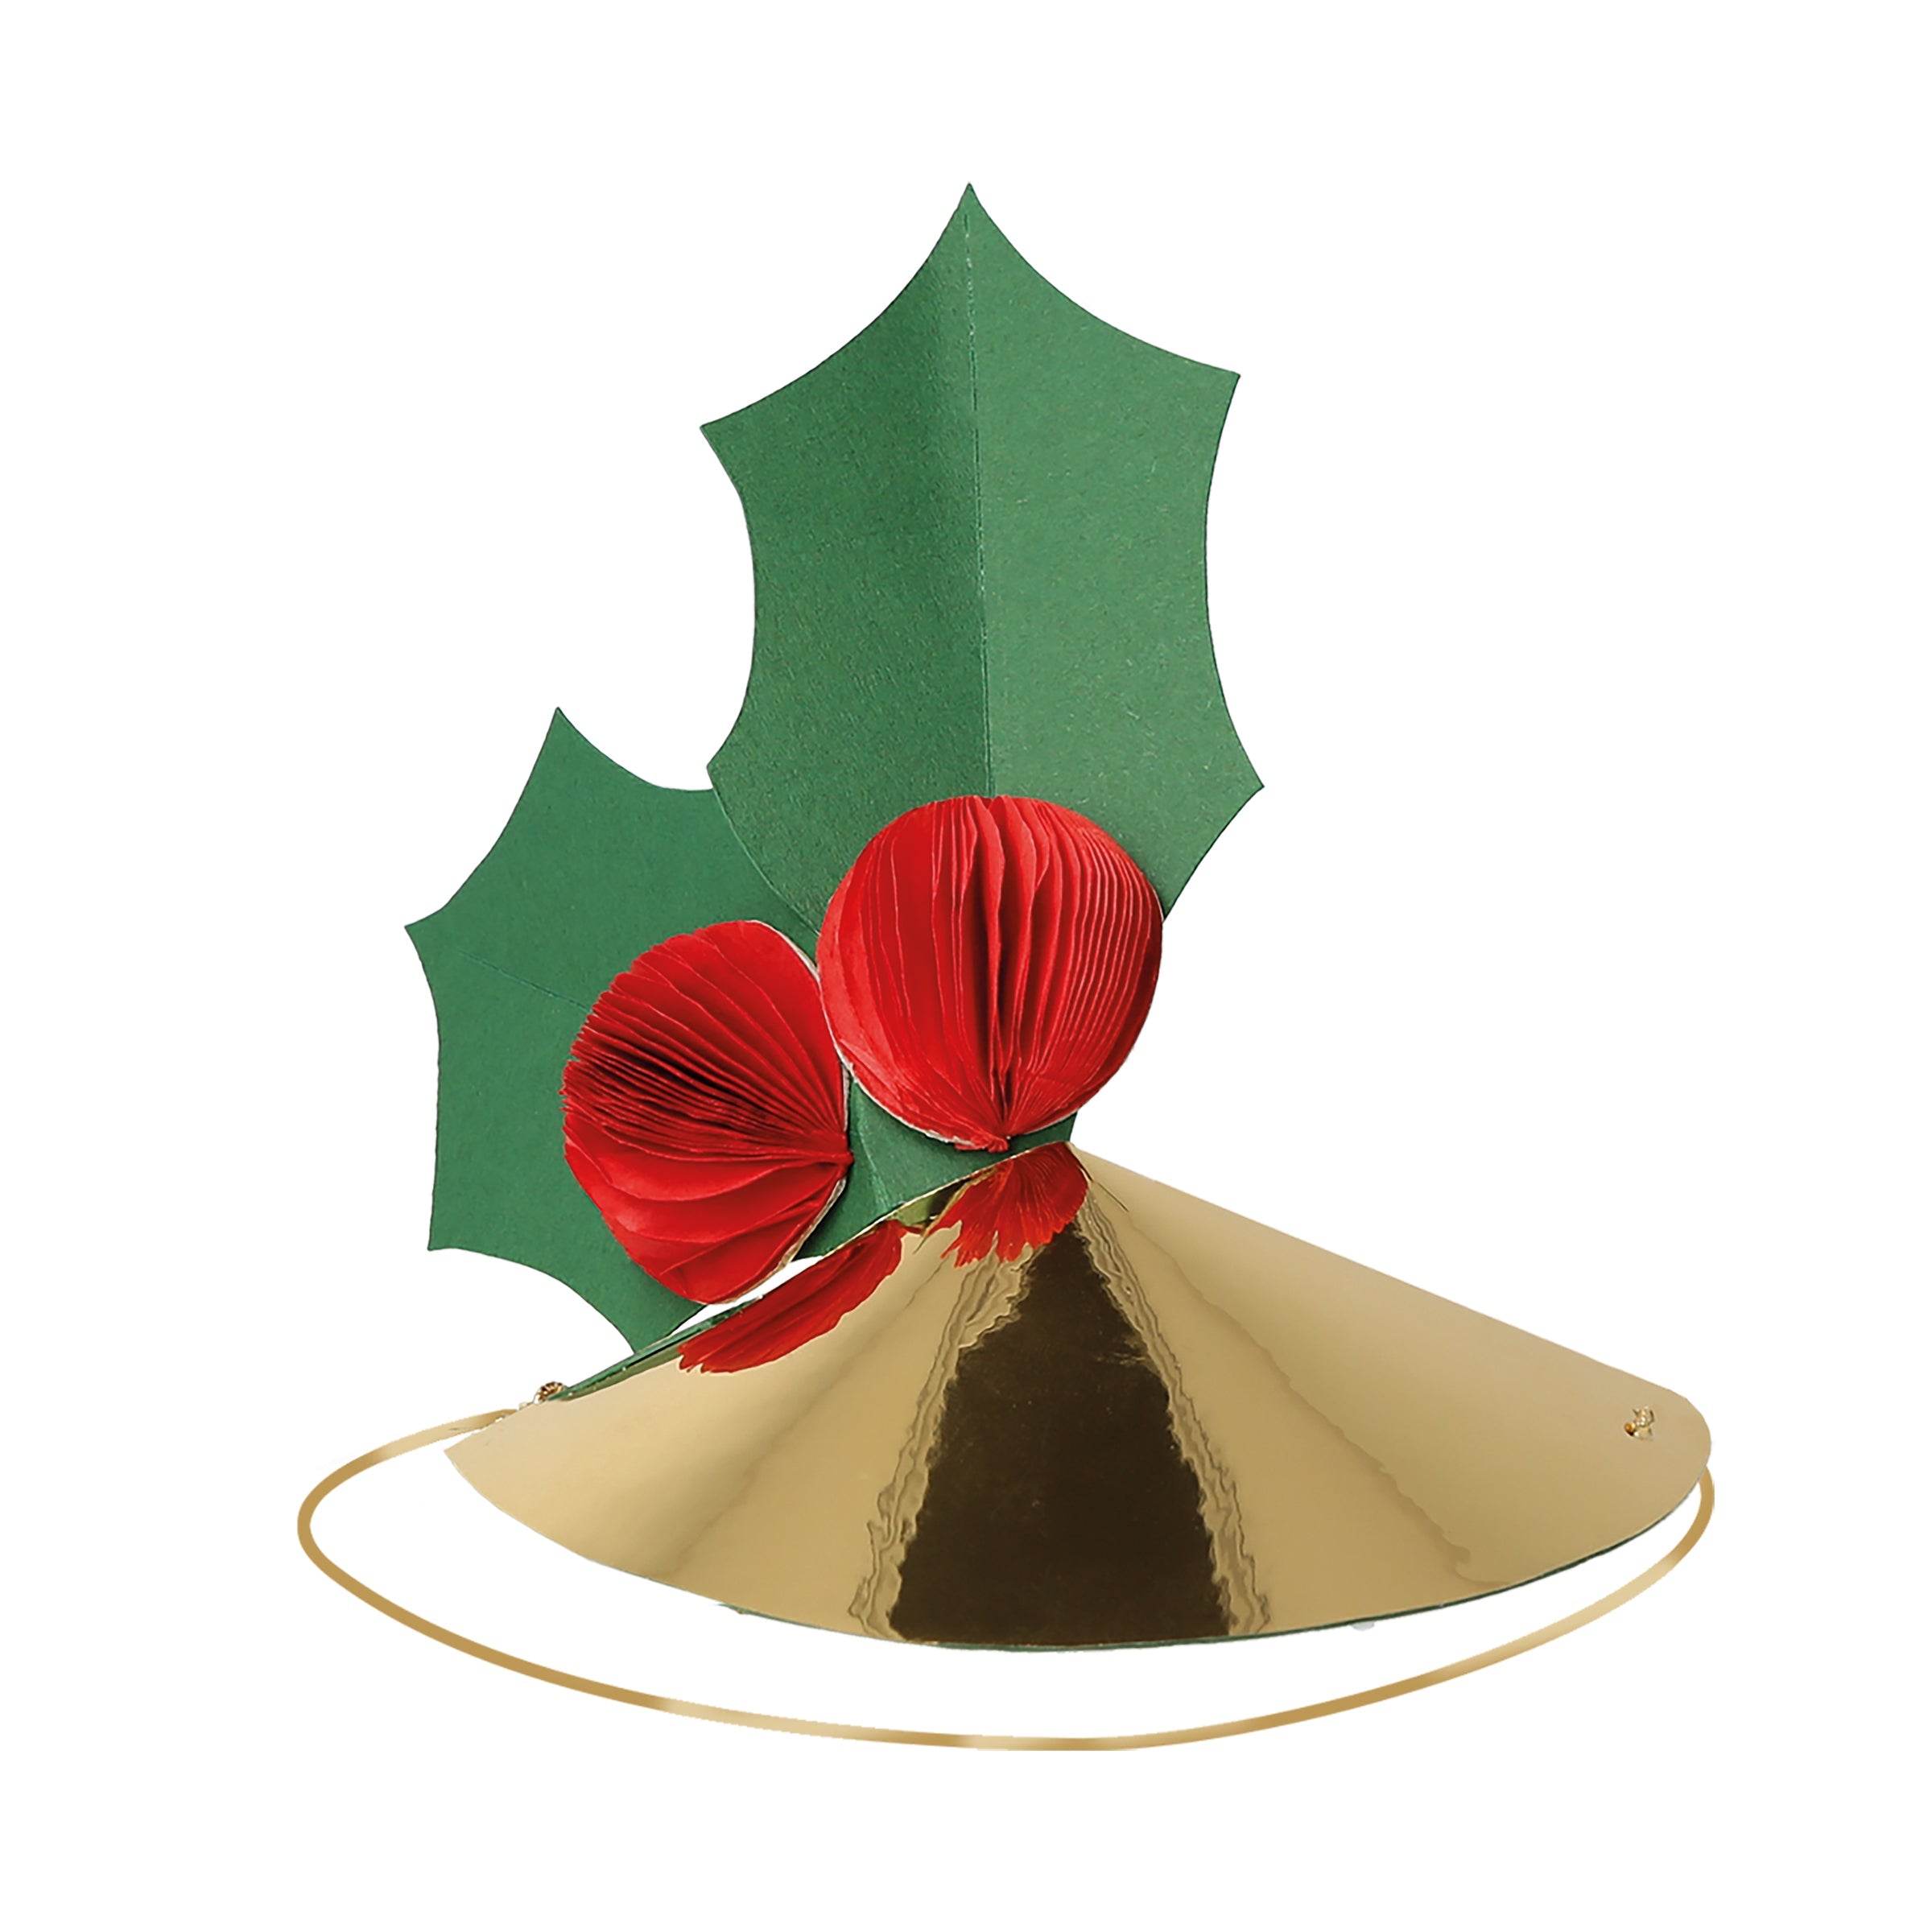 Mixed Christmas Party Hats (6 Pack)